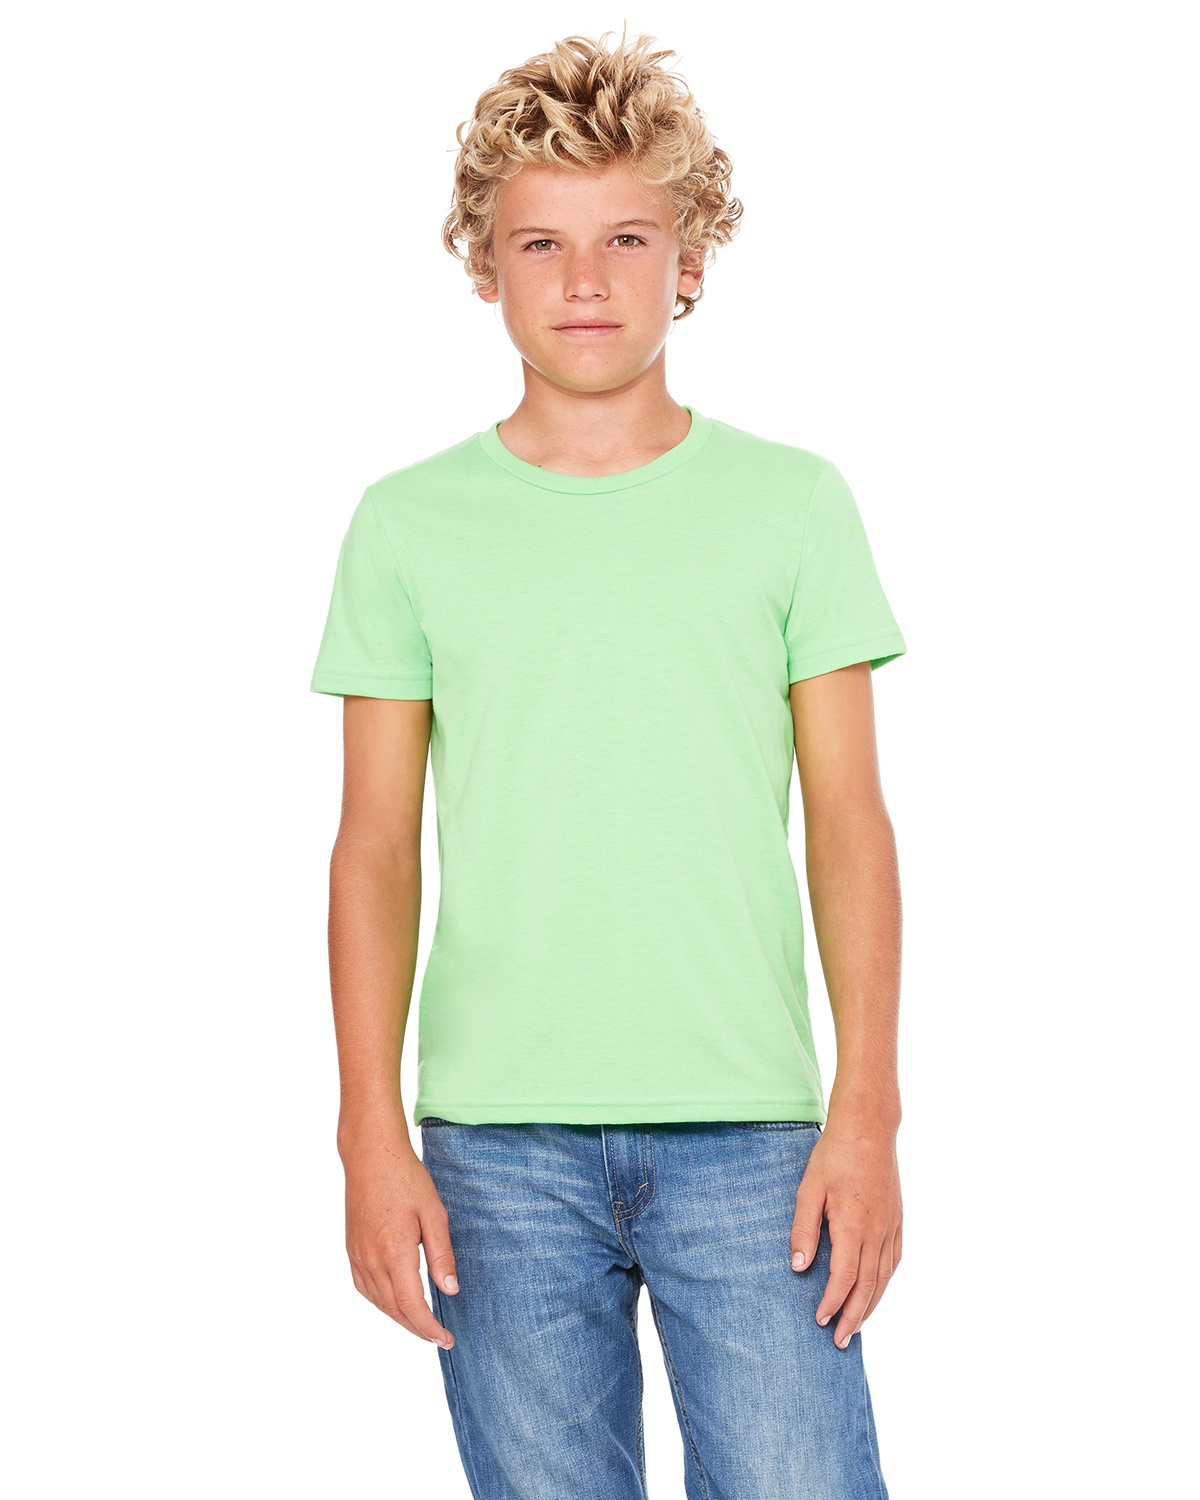 'Bella Canvas 3001Y Youth Jersey T Shirt'